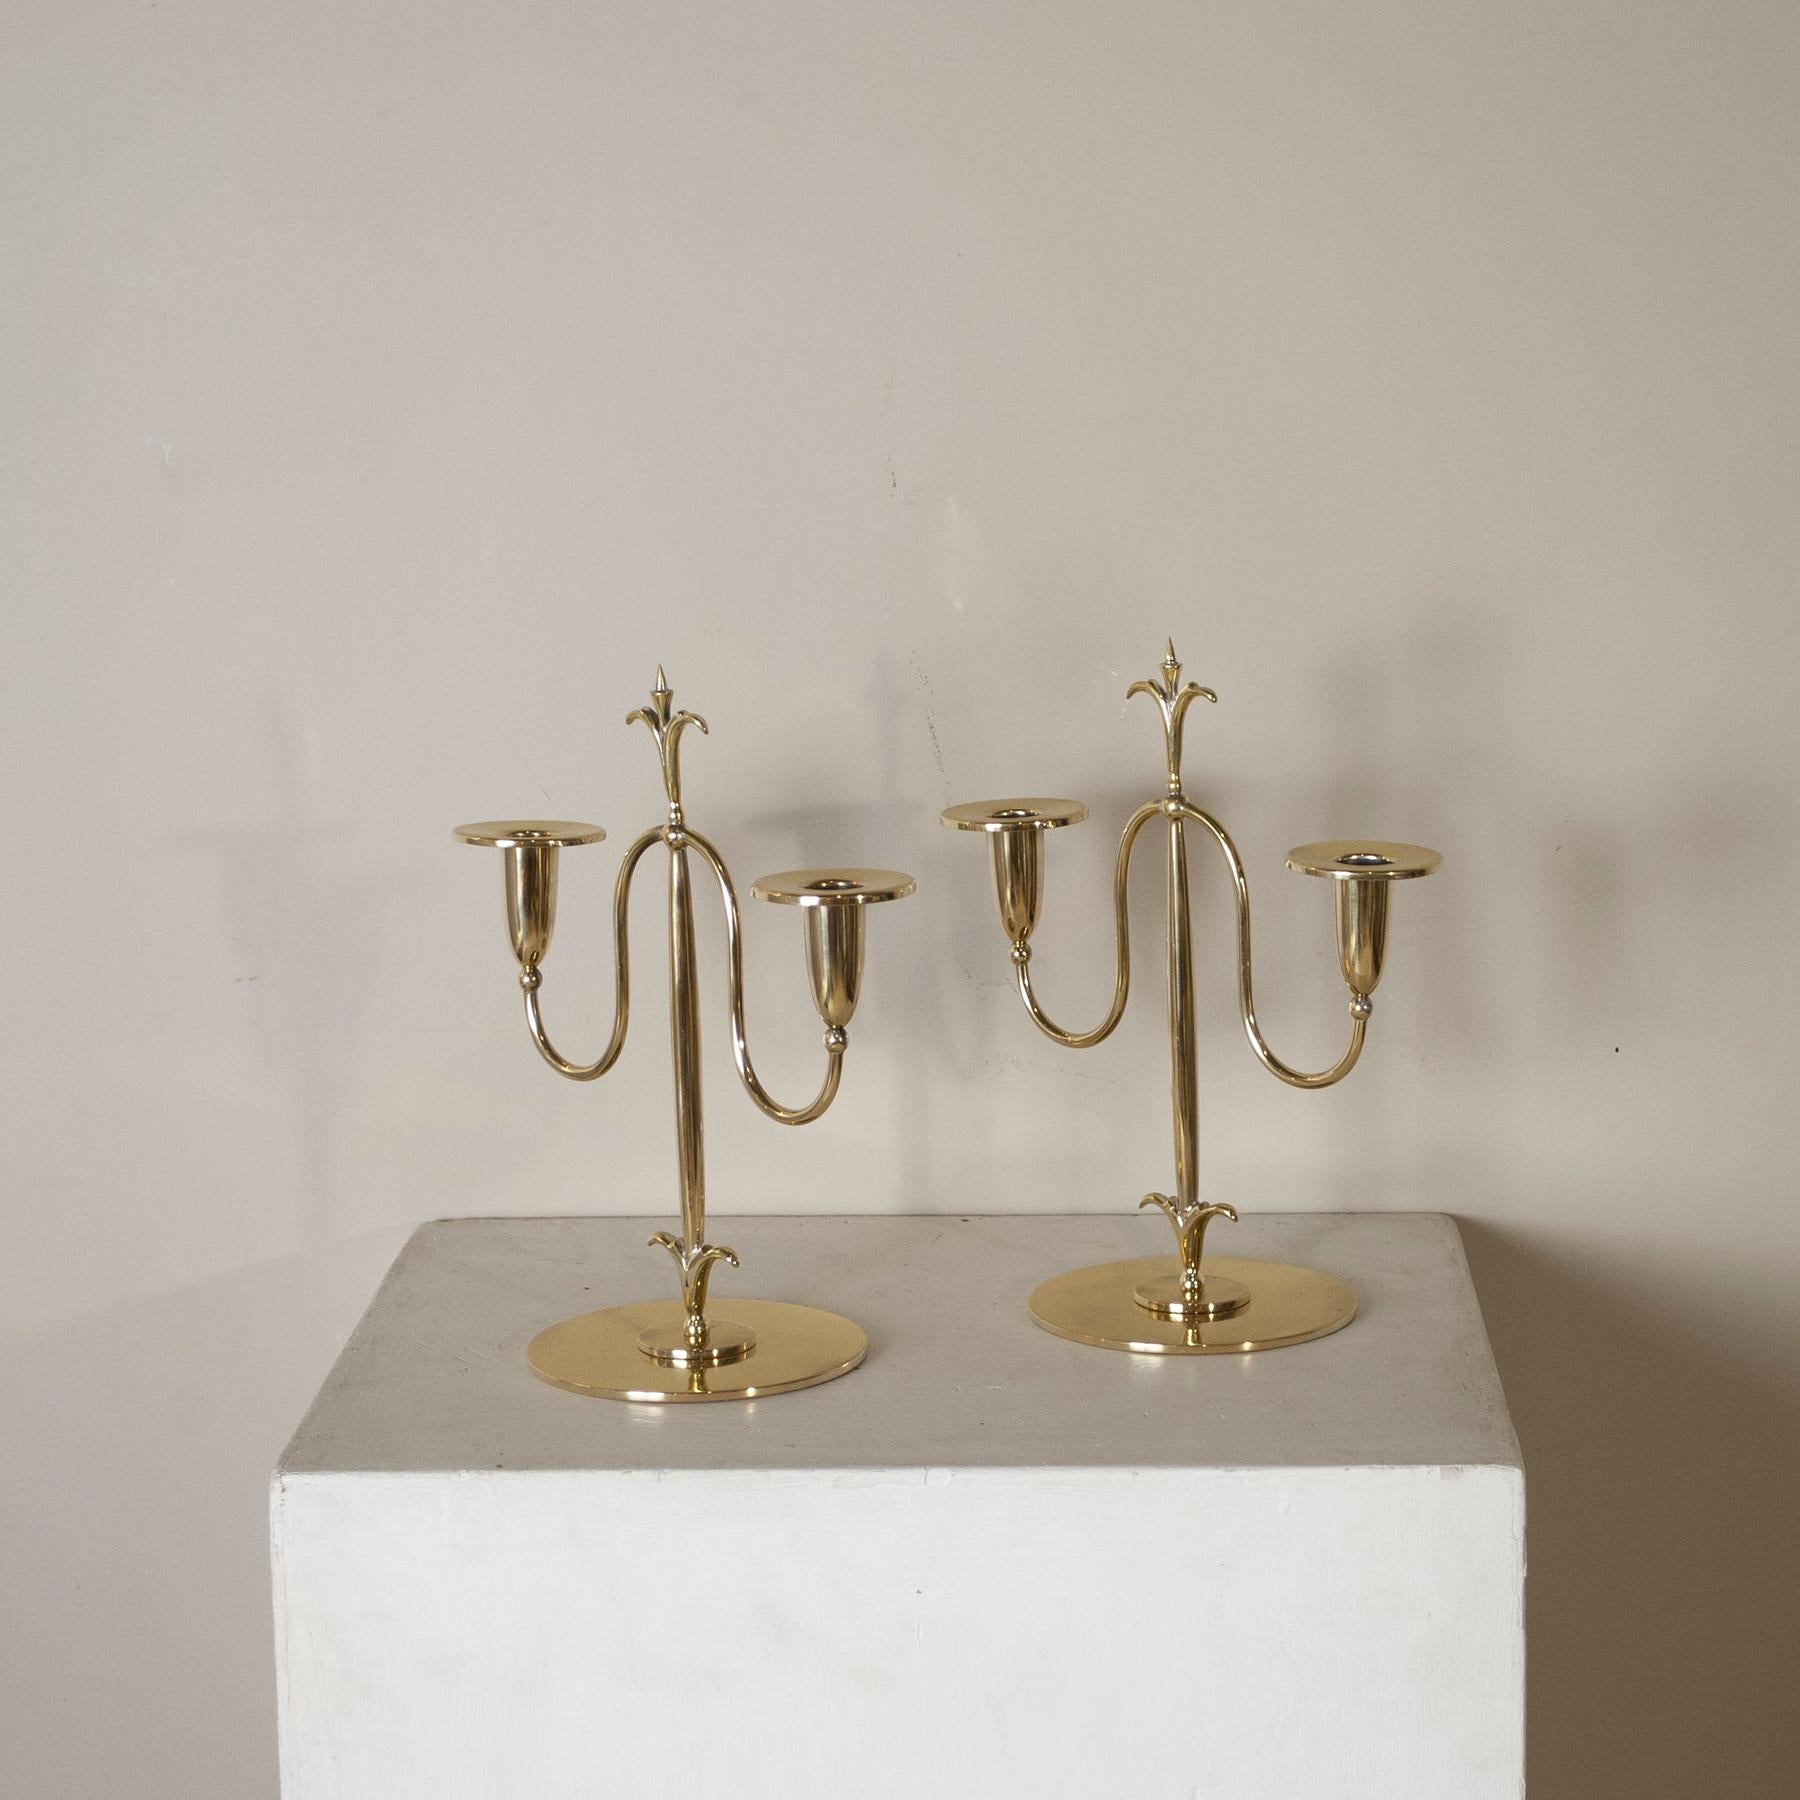 Set of two Art Déco brass candlesticks 1940s by Gunner Ander.